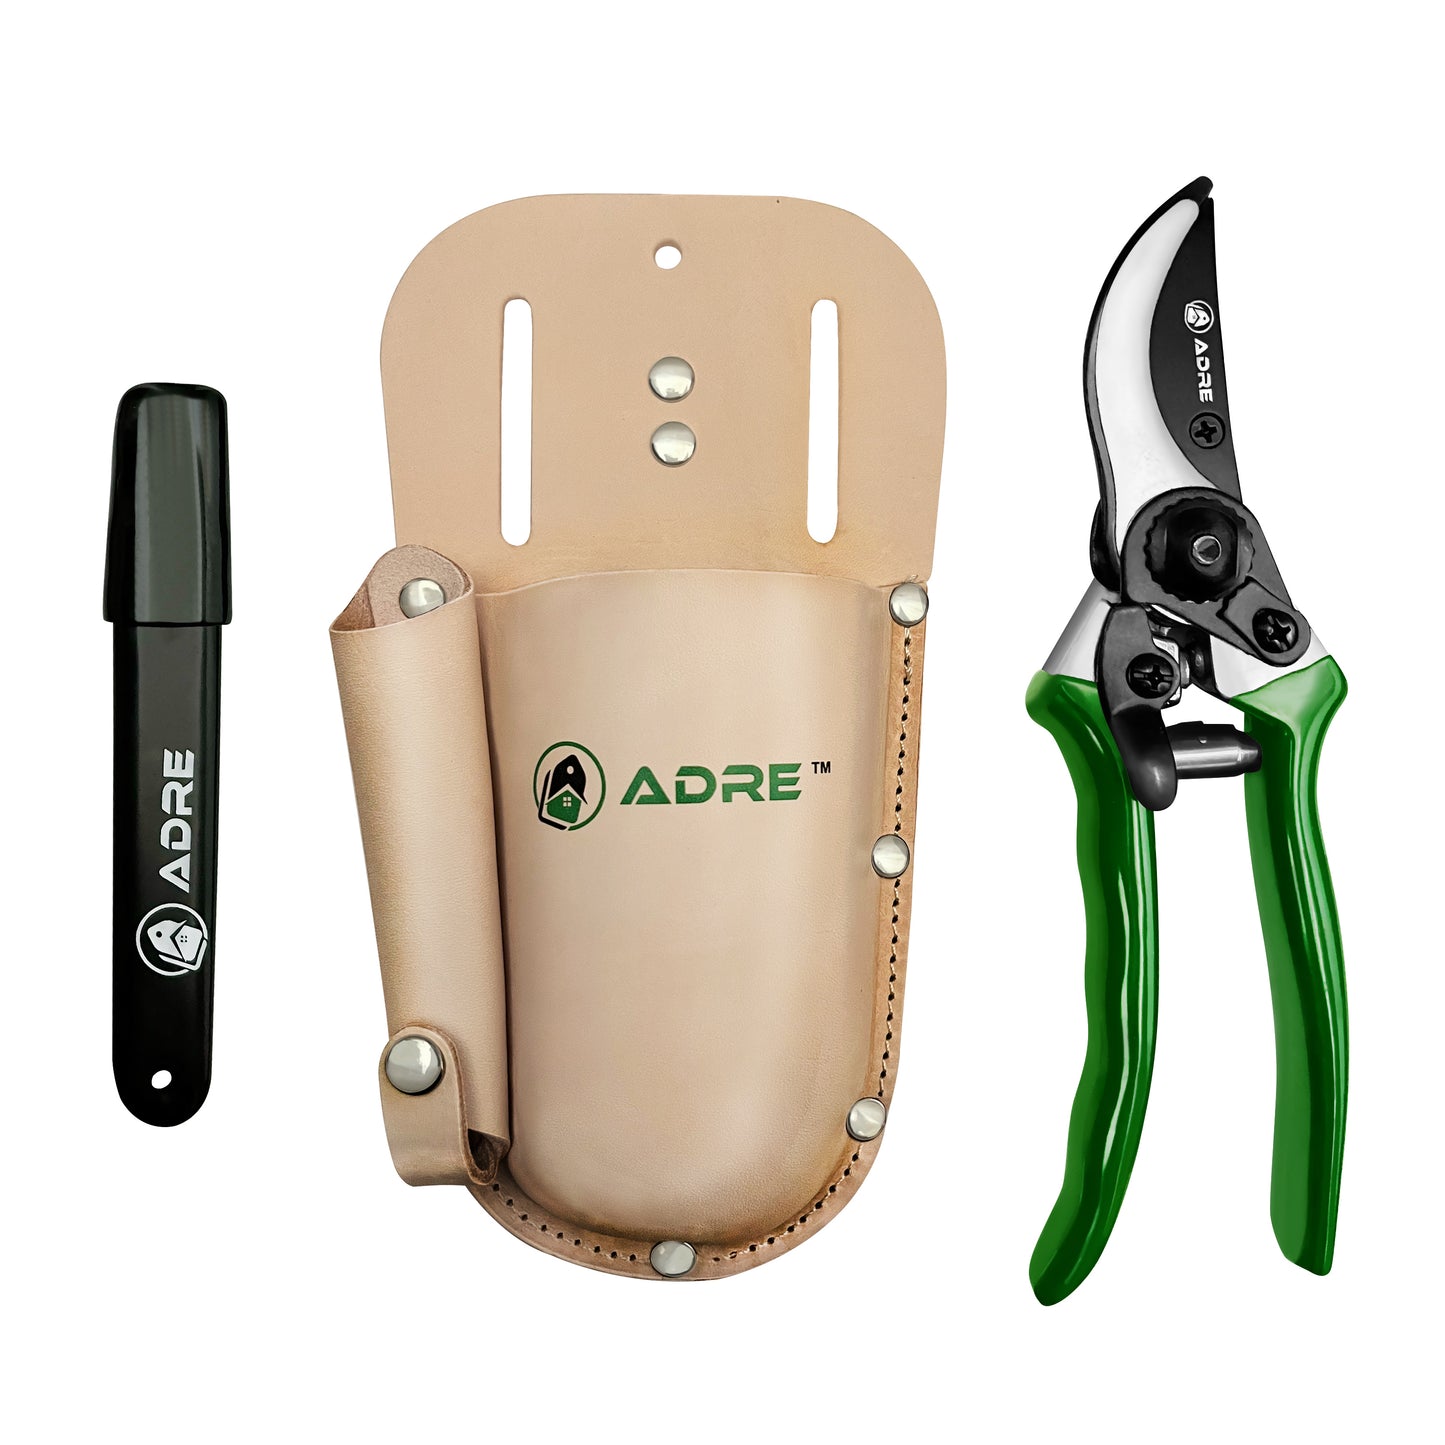 Adre Pruning Shears with Leather Sheath – Complete 3-Pack with Pruning Shears for Gardening, Pruner Holster and Carbide Blade Sharpener – Professional Gardening Tools for Pruning, Cutting, Clipping